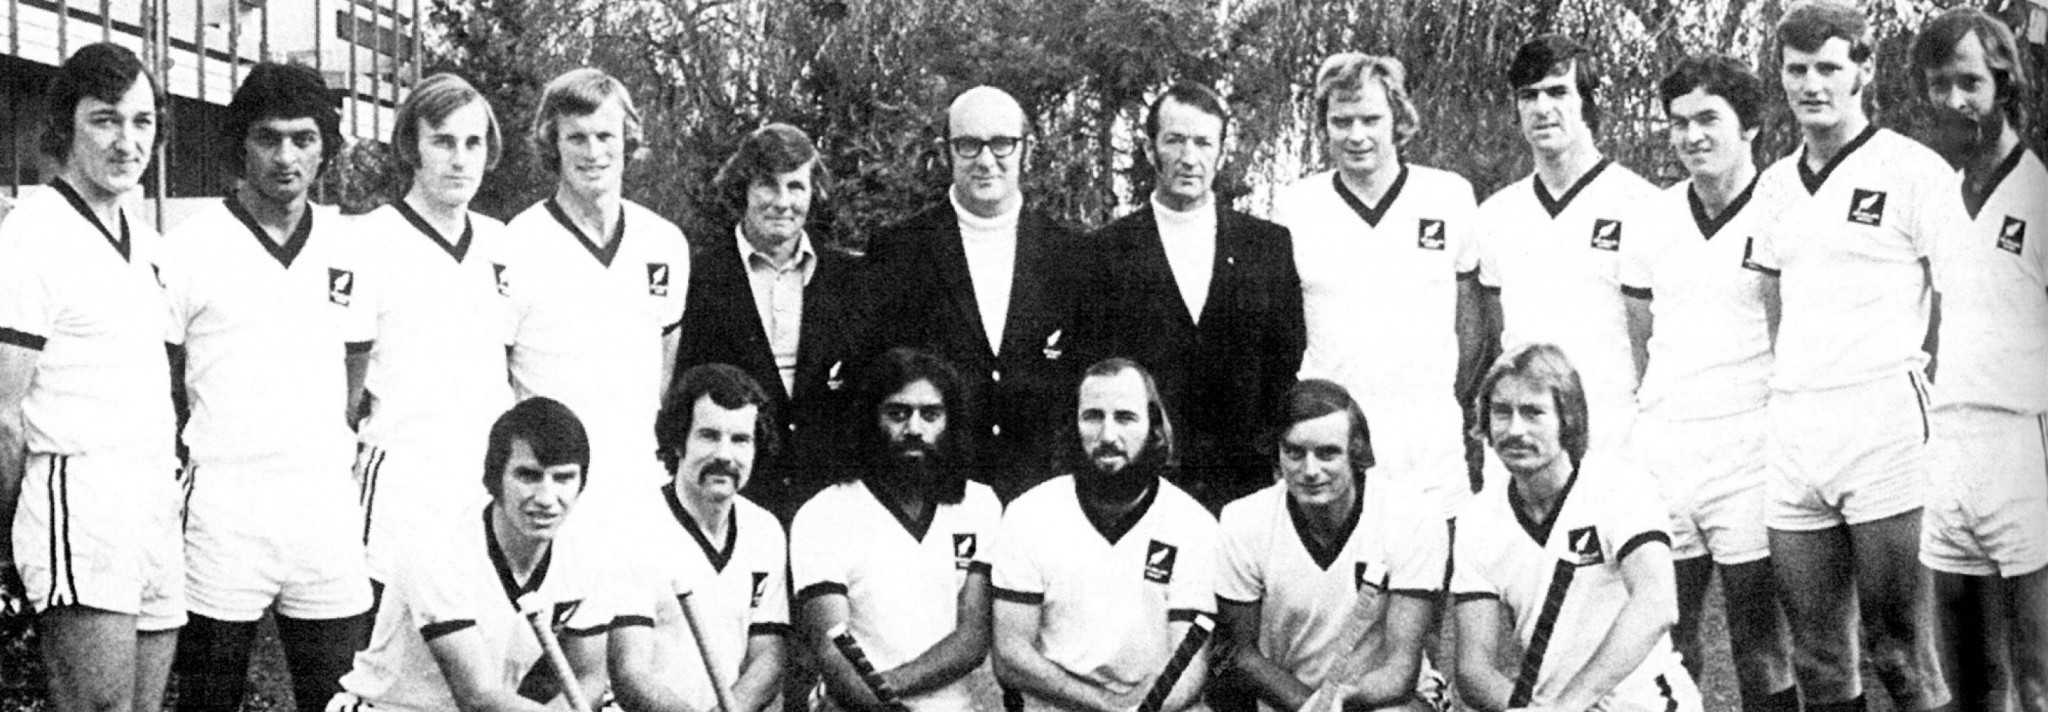  Ross Gillespie, fifth from left in the back row, with the New Zealand hockey team he coached to the 1976 men's hockey title ©NZOC